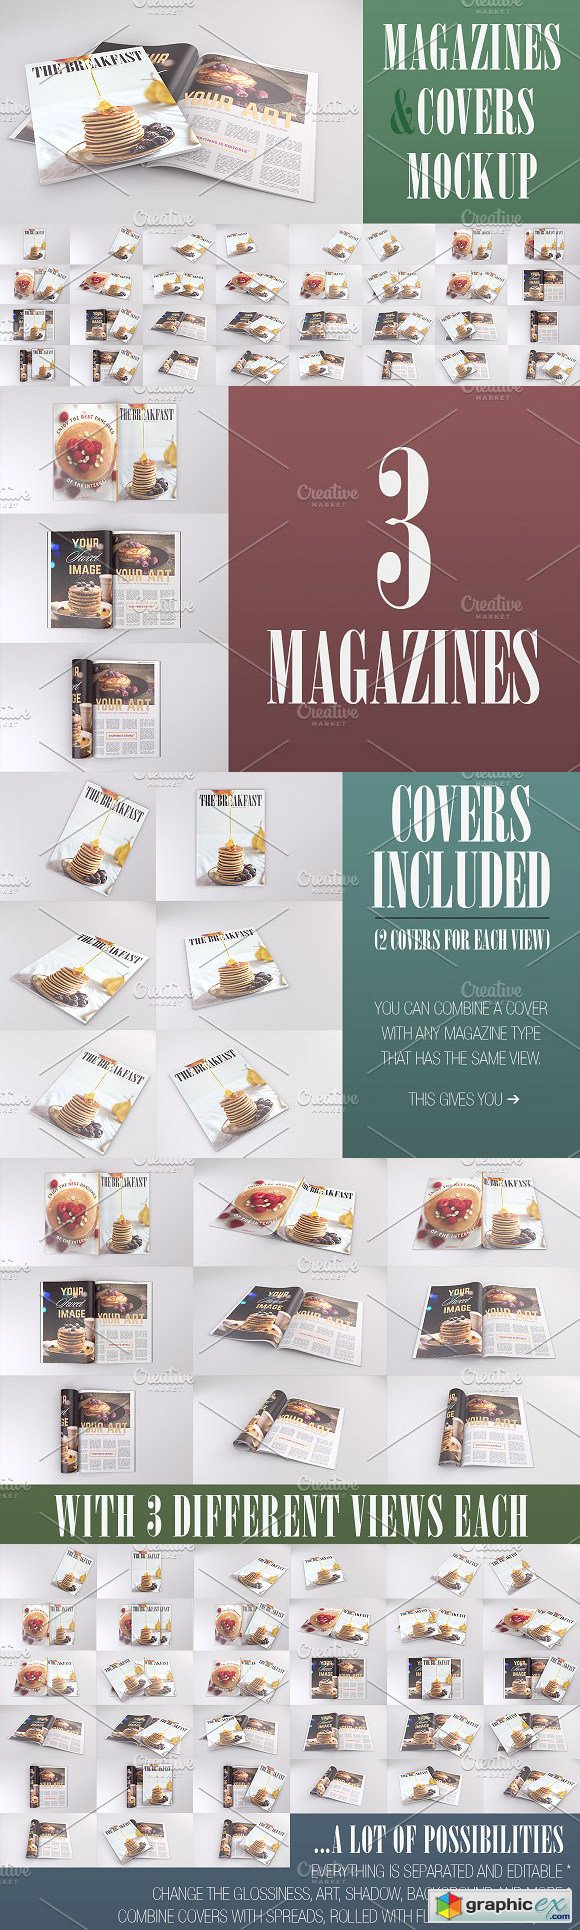 Magazines and Covers Mockup v1